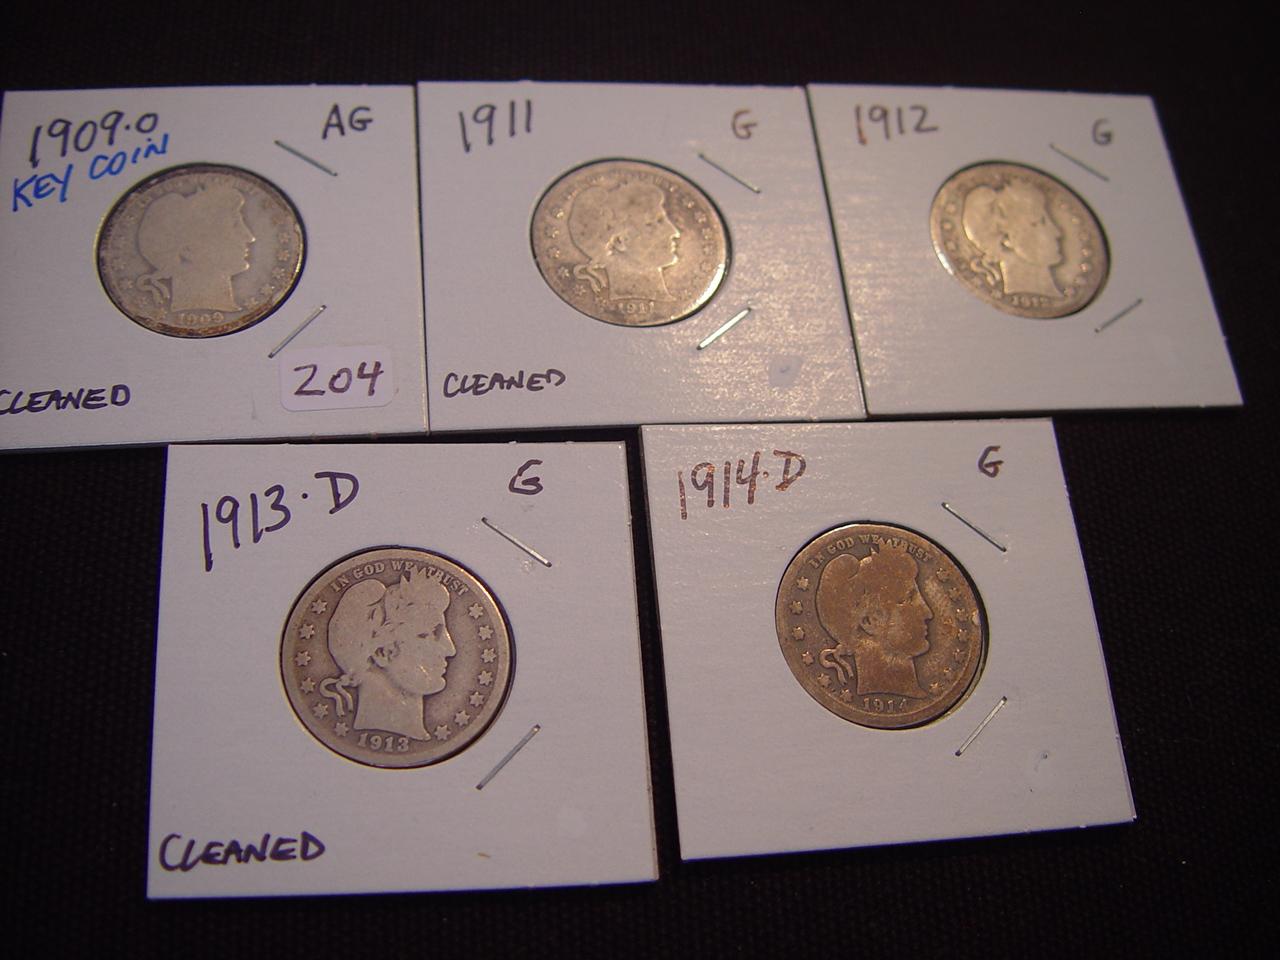 25 Cent Barbers 5 Total; 1909-O AG Cleaned, 1911 G Cleaned, 1912 G, 1913-D G Cleaned & 1914-D G